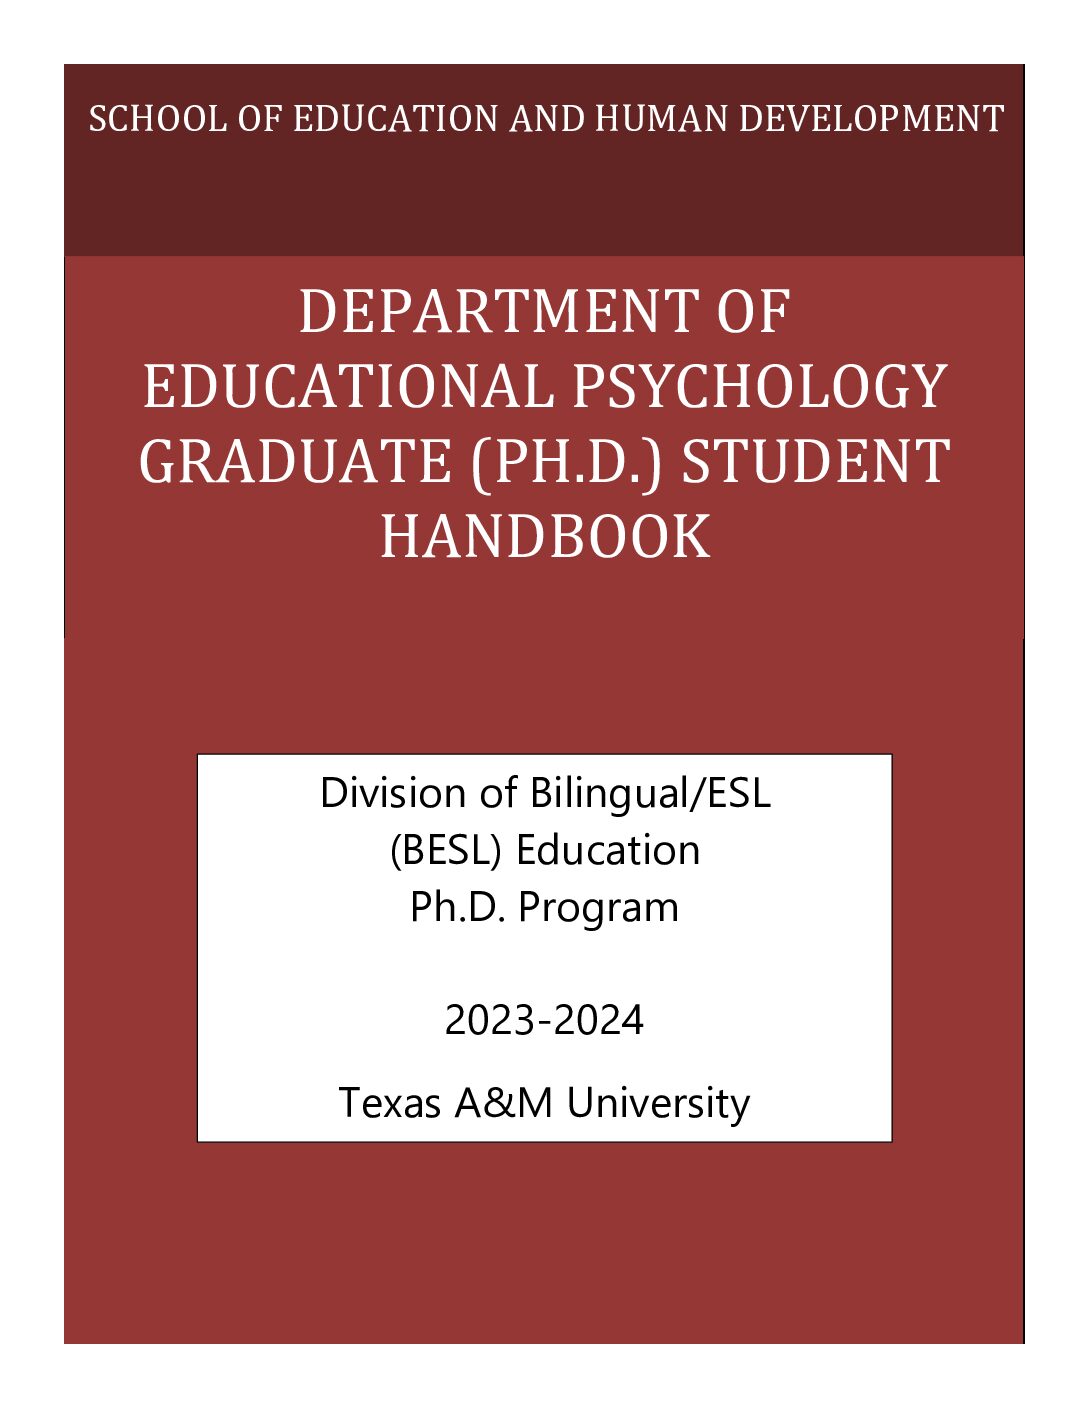 doctoral degree educational psychology